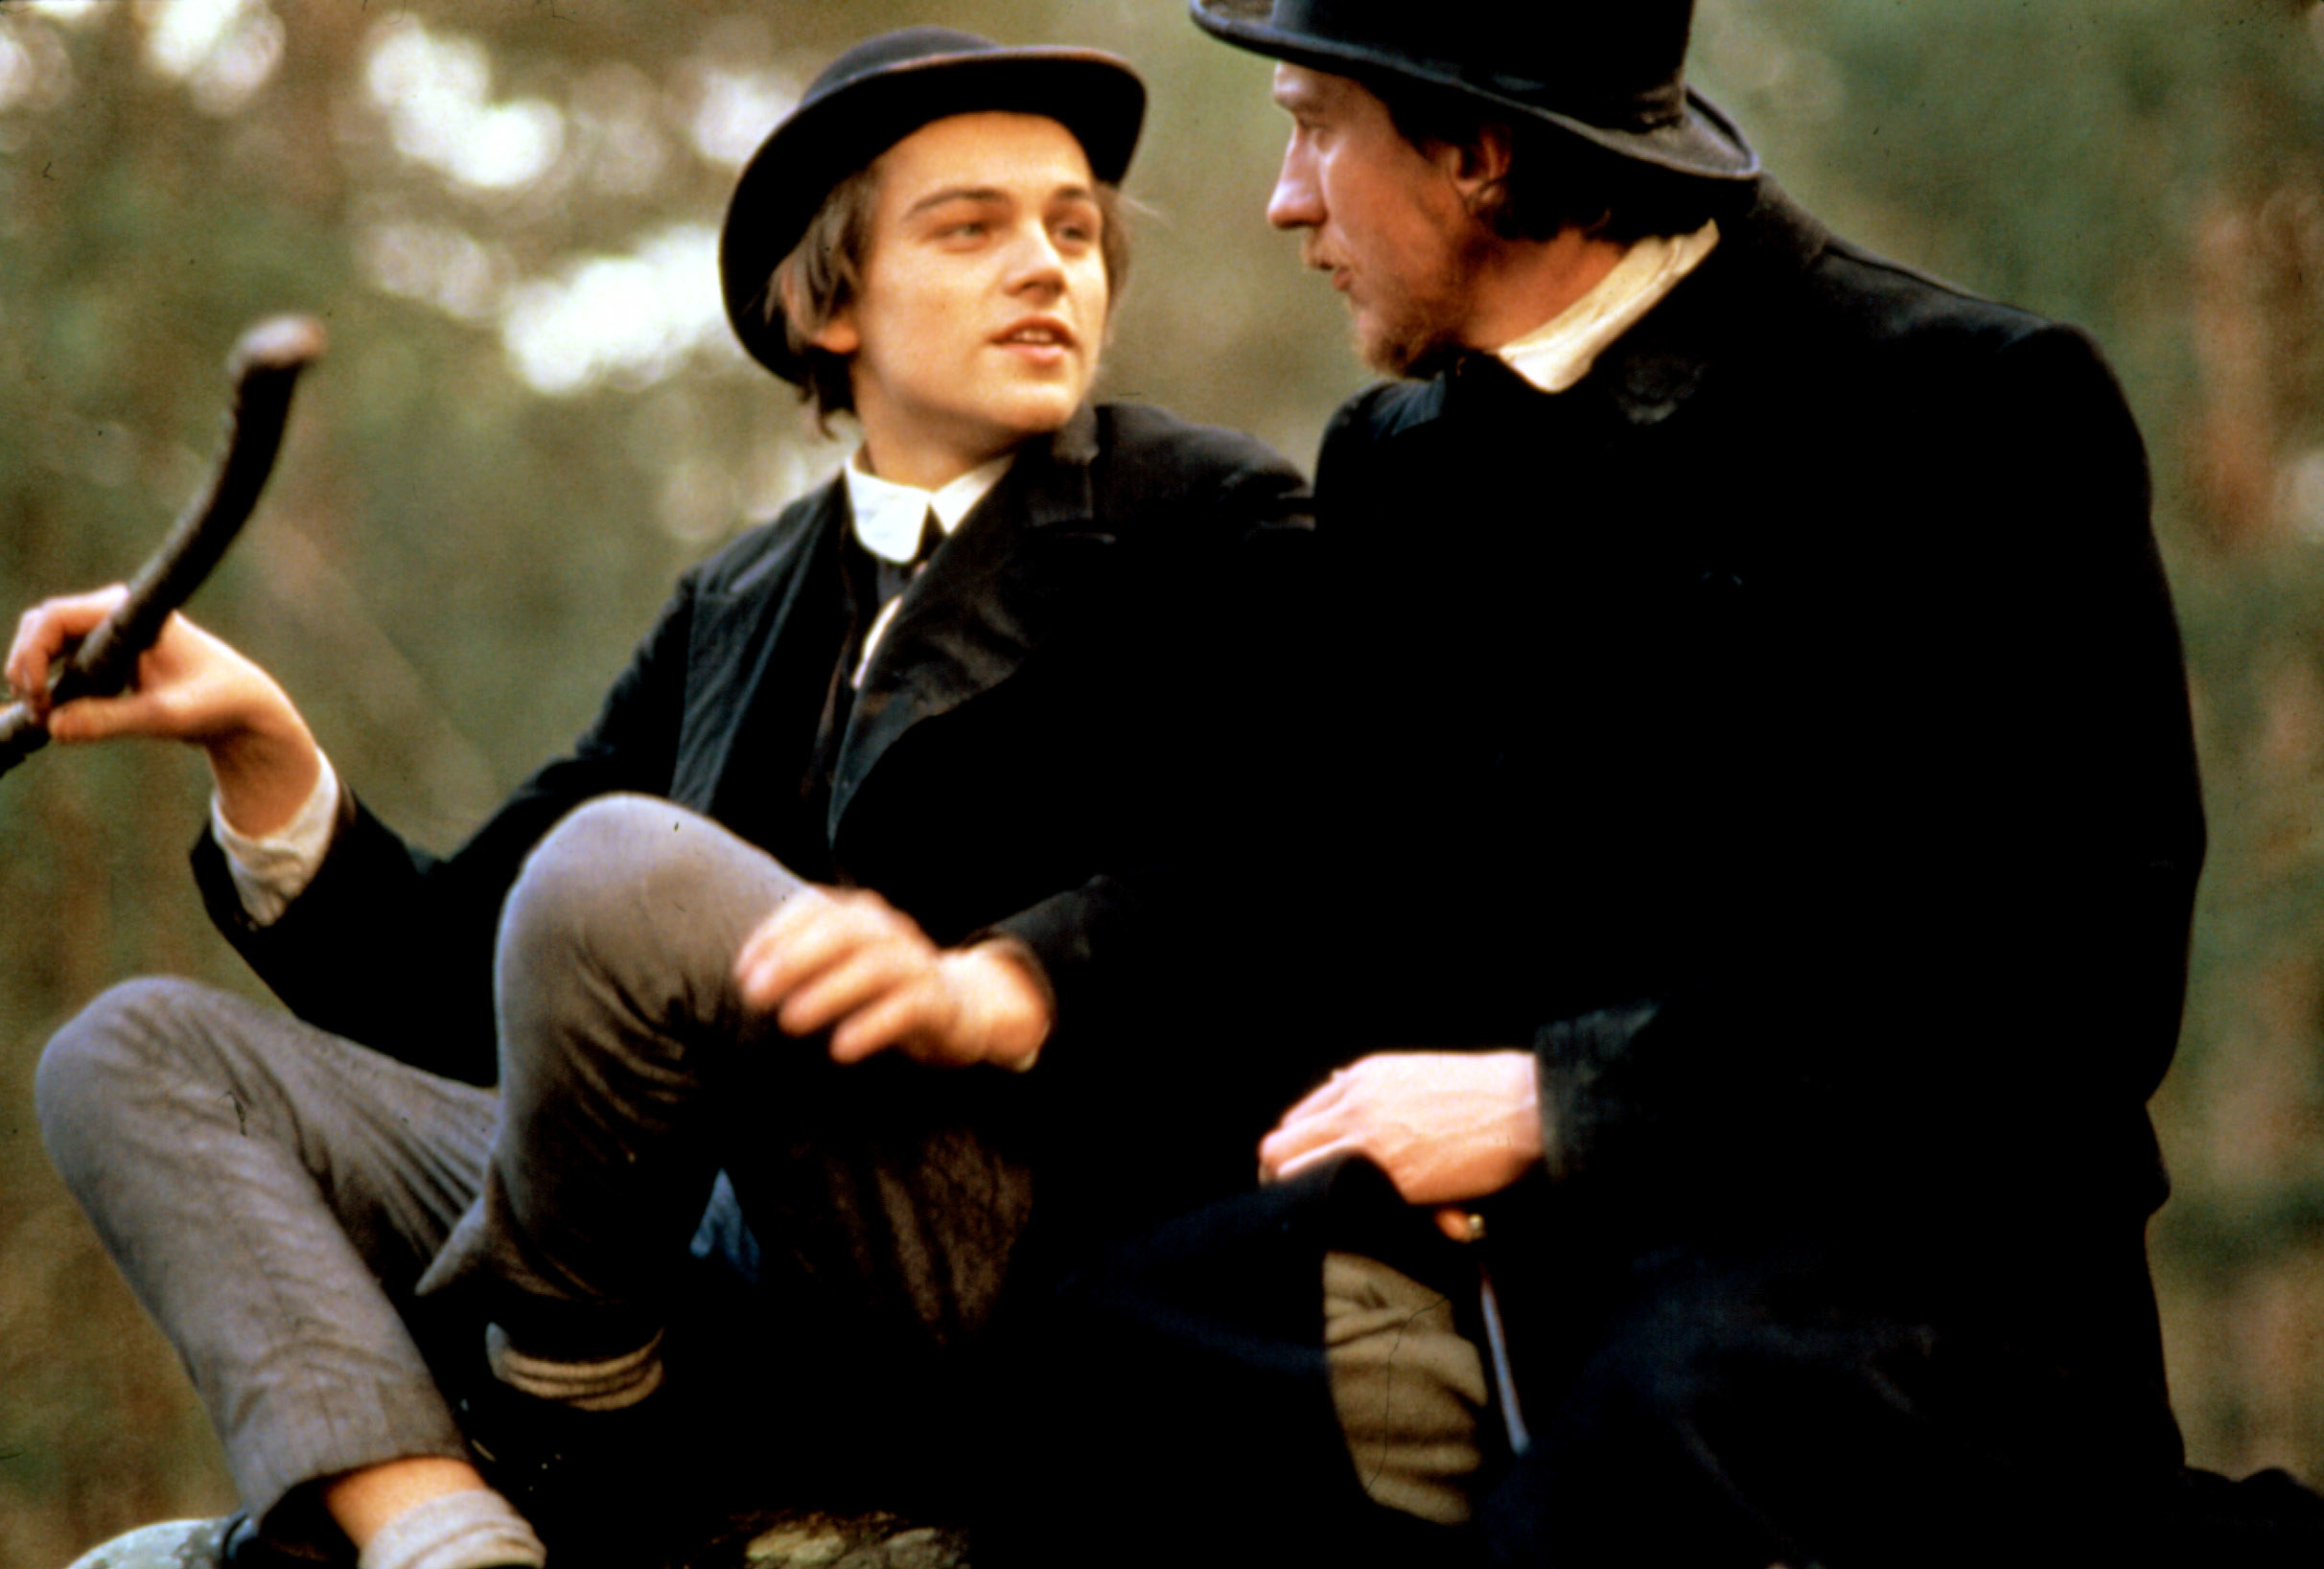 Leonardo Di Caprio and David Thewlis sit in a carriage together